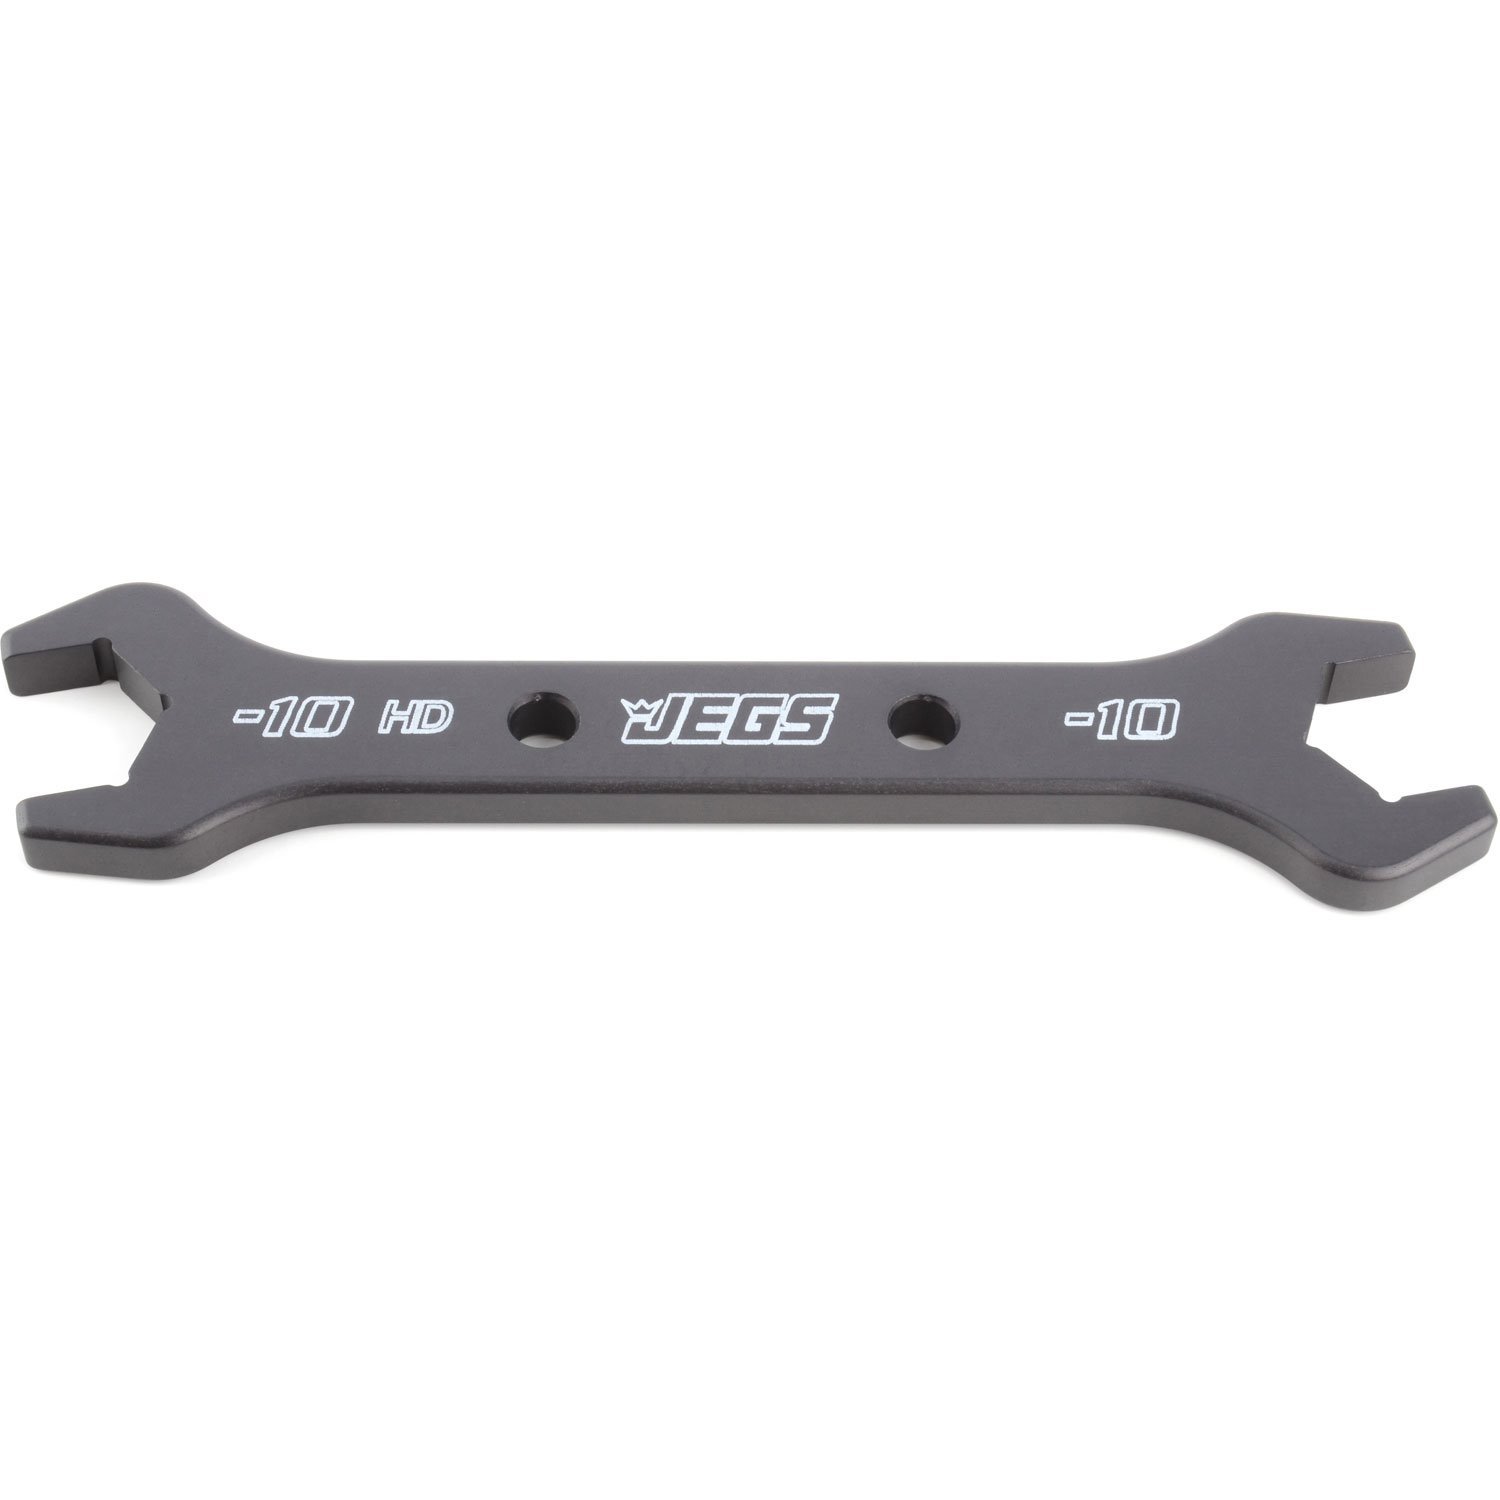 AN Open End Wrench Fits -10 AN (1-1/16 in. Hex) HD & -10 AN (1 in. Hex) Standard Fittings